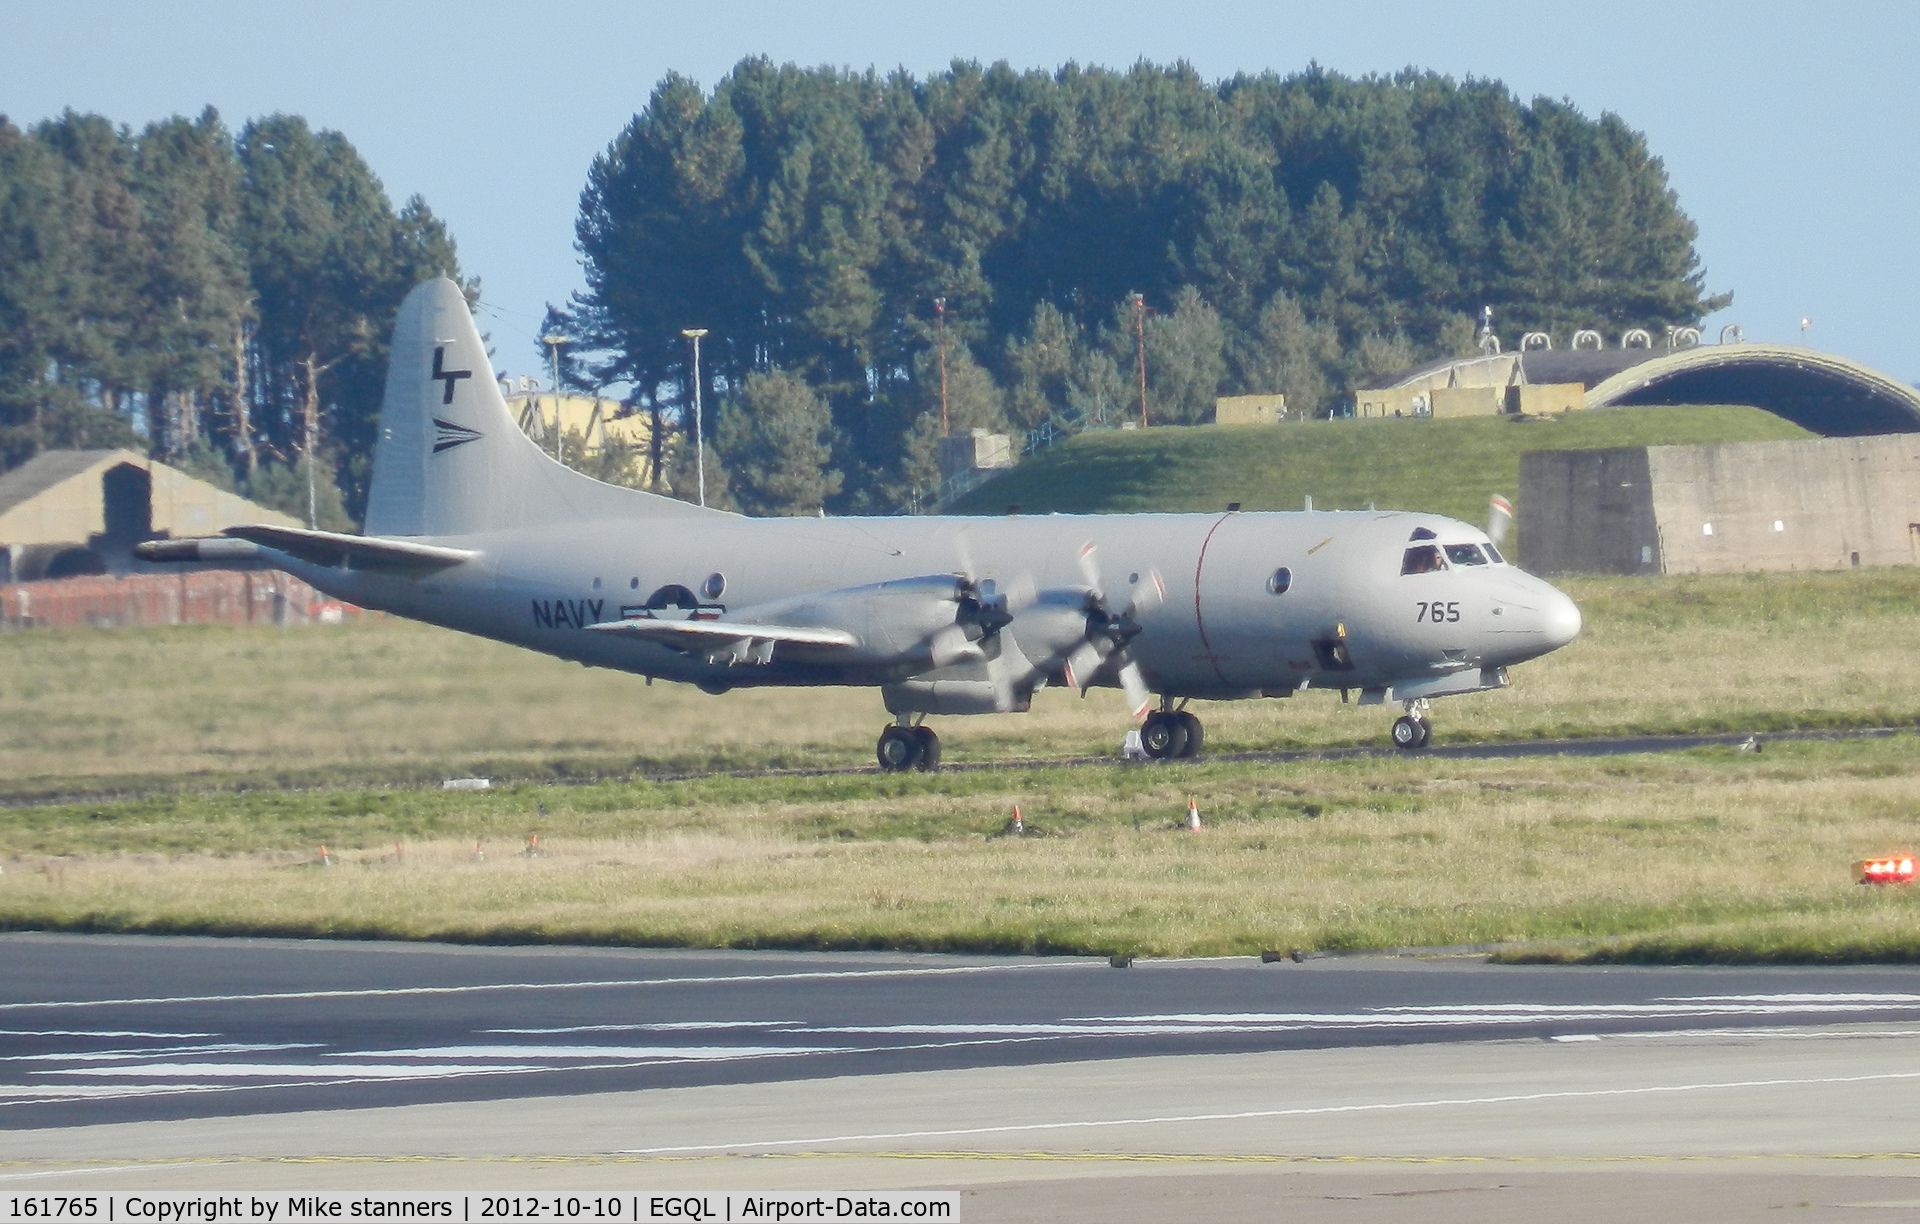 161765, Lockheed P-3C Orion C/N 285G-5779, VP-62 Orion ,one of 3 US Navy P-3's deployed to RAF Leuchars for exercise Joint warrior